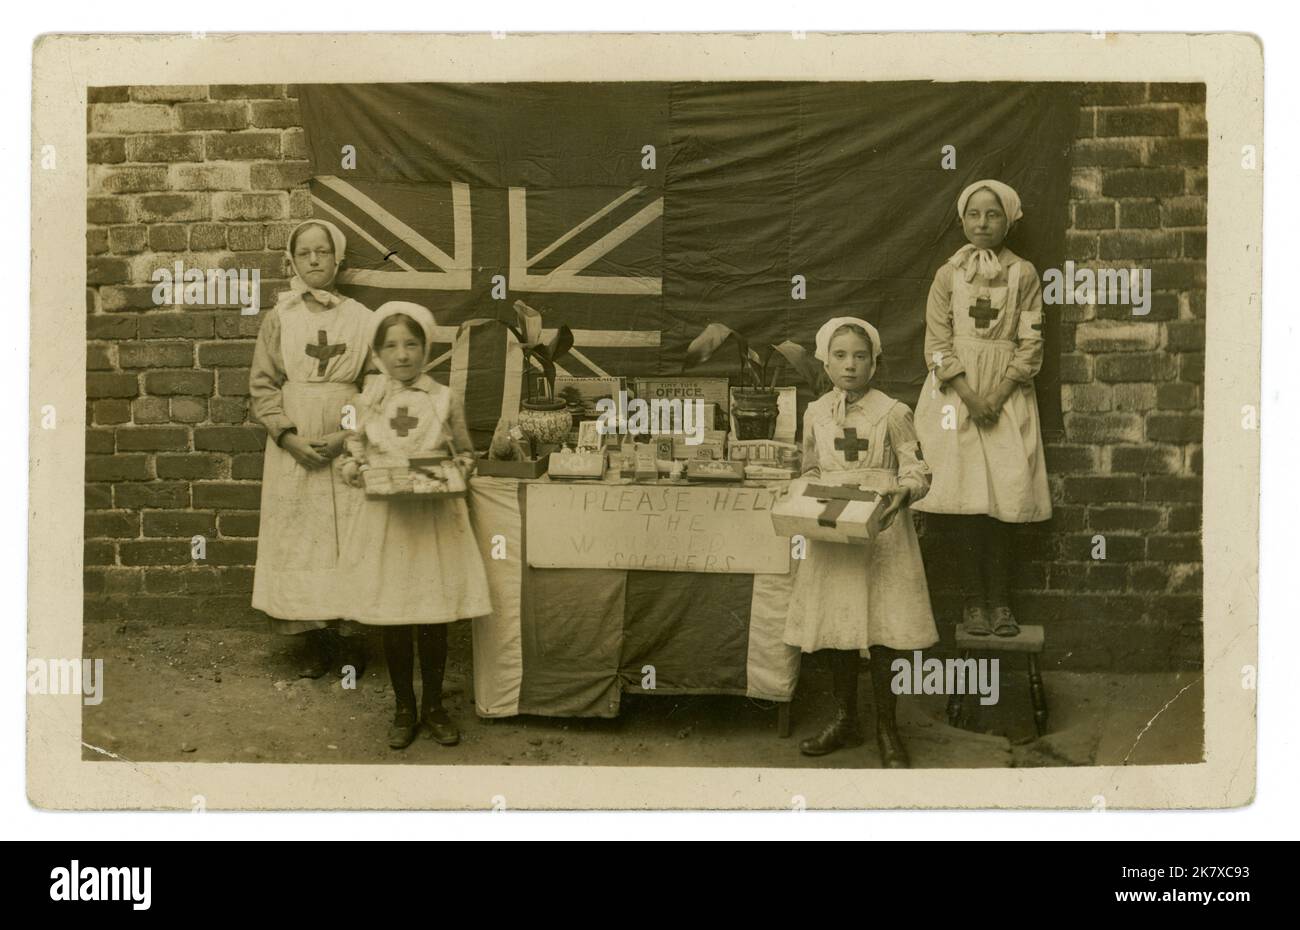 Original and charming WW1 era postcard of working class children dressed in red cross uniforms, with a stall raffling or selling their toys and games, sweets and potted plants to help raise money for wounded soldiers, Union Jack flag in background, 1914-1918 U.K. Stock Photo